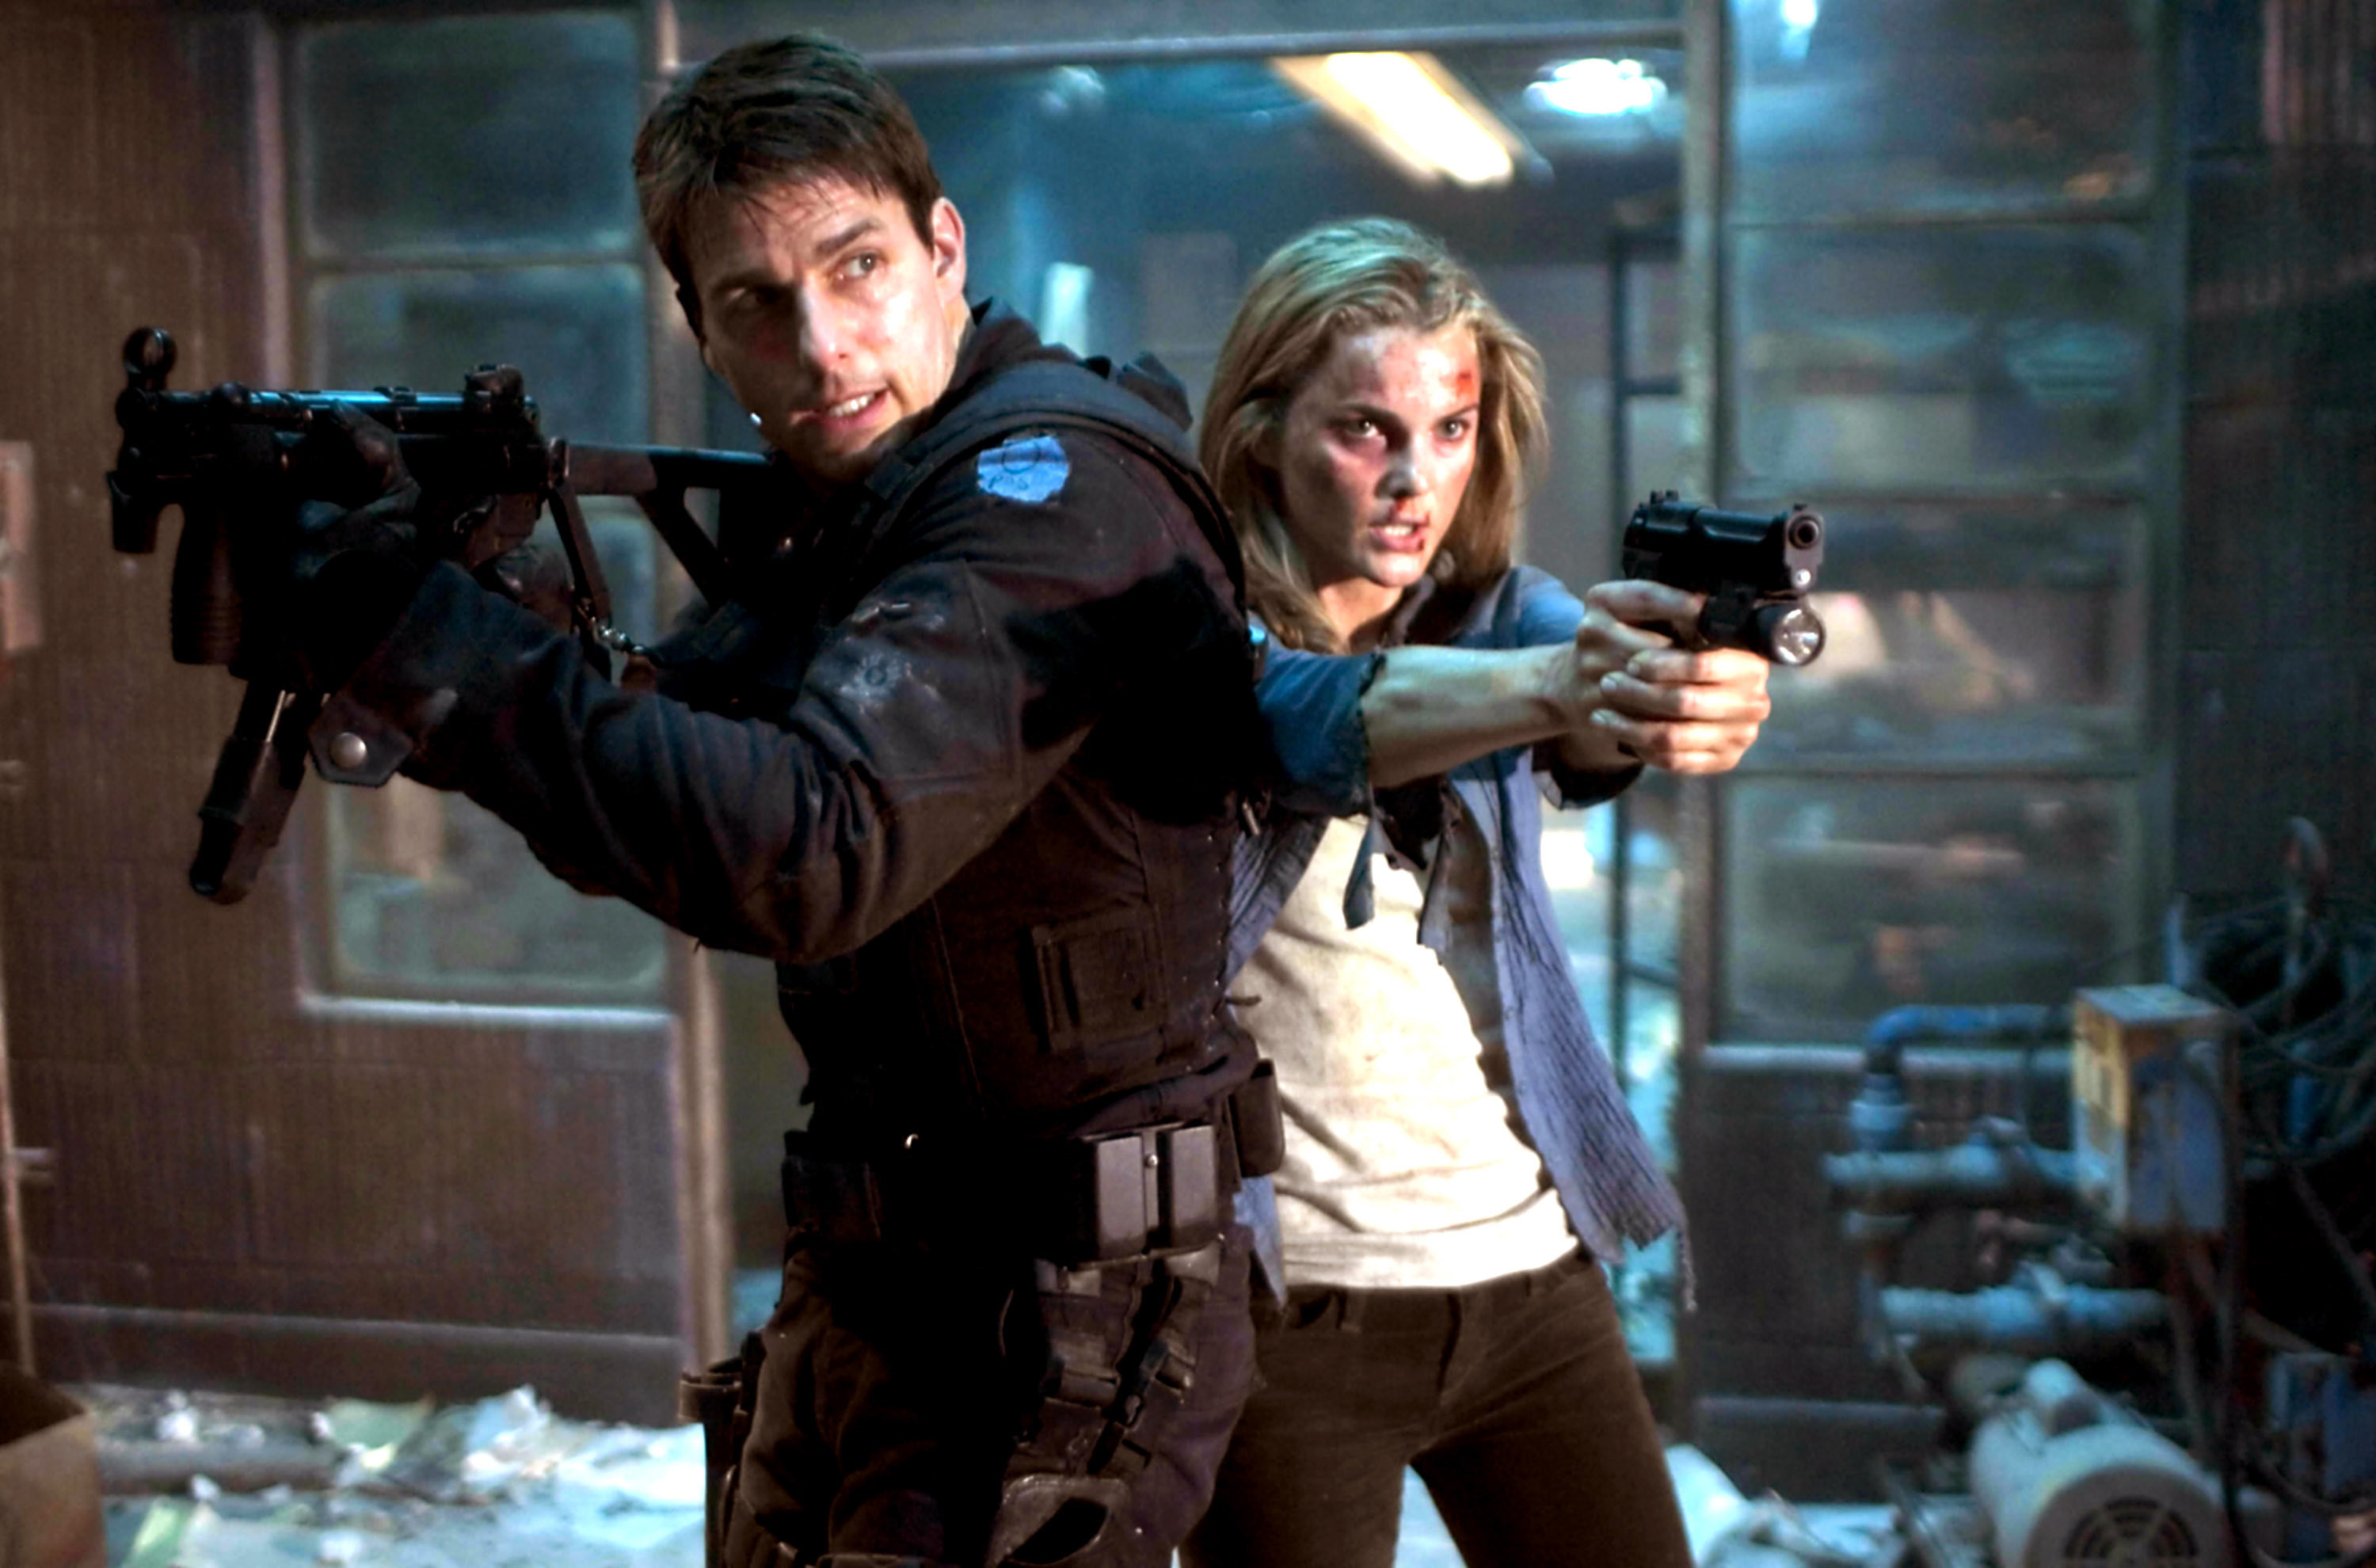 Tom Cruise and Keri Russell pointing guns in &quot;Mission: Impossible III&quot;